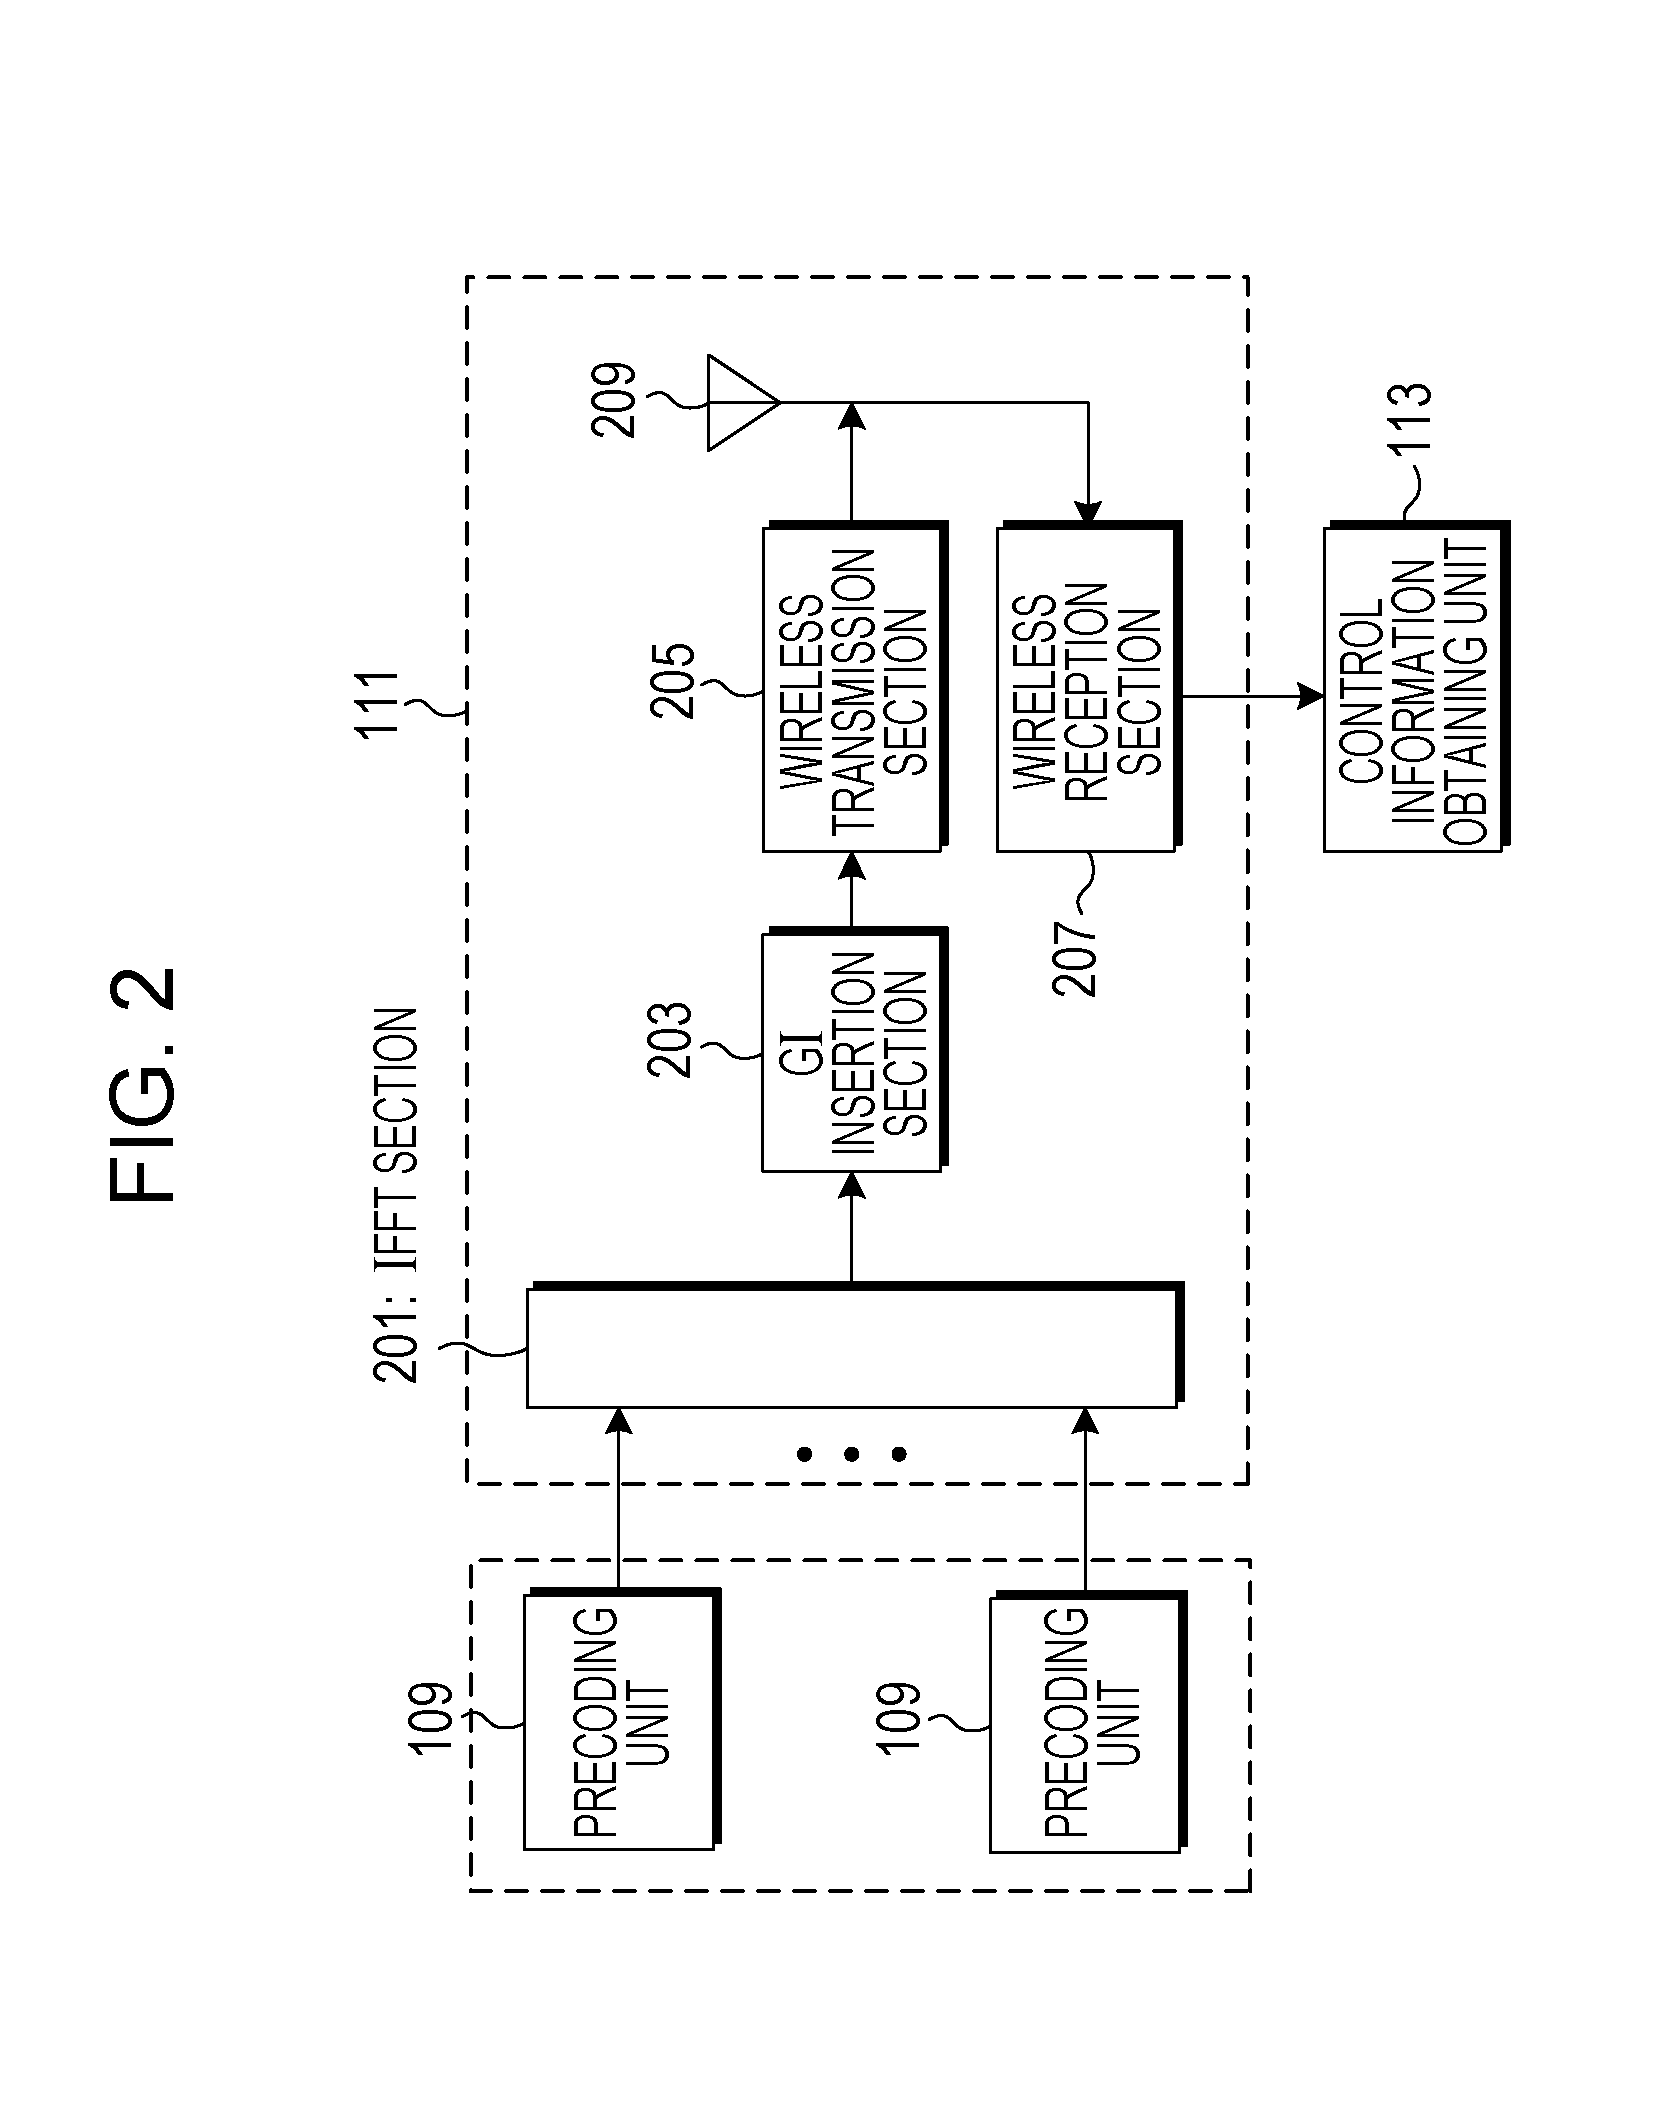 Precoding apparatus, program for precoding, and integrated circuit